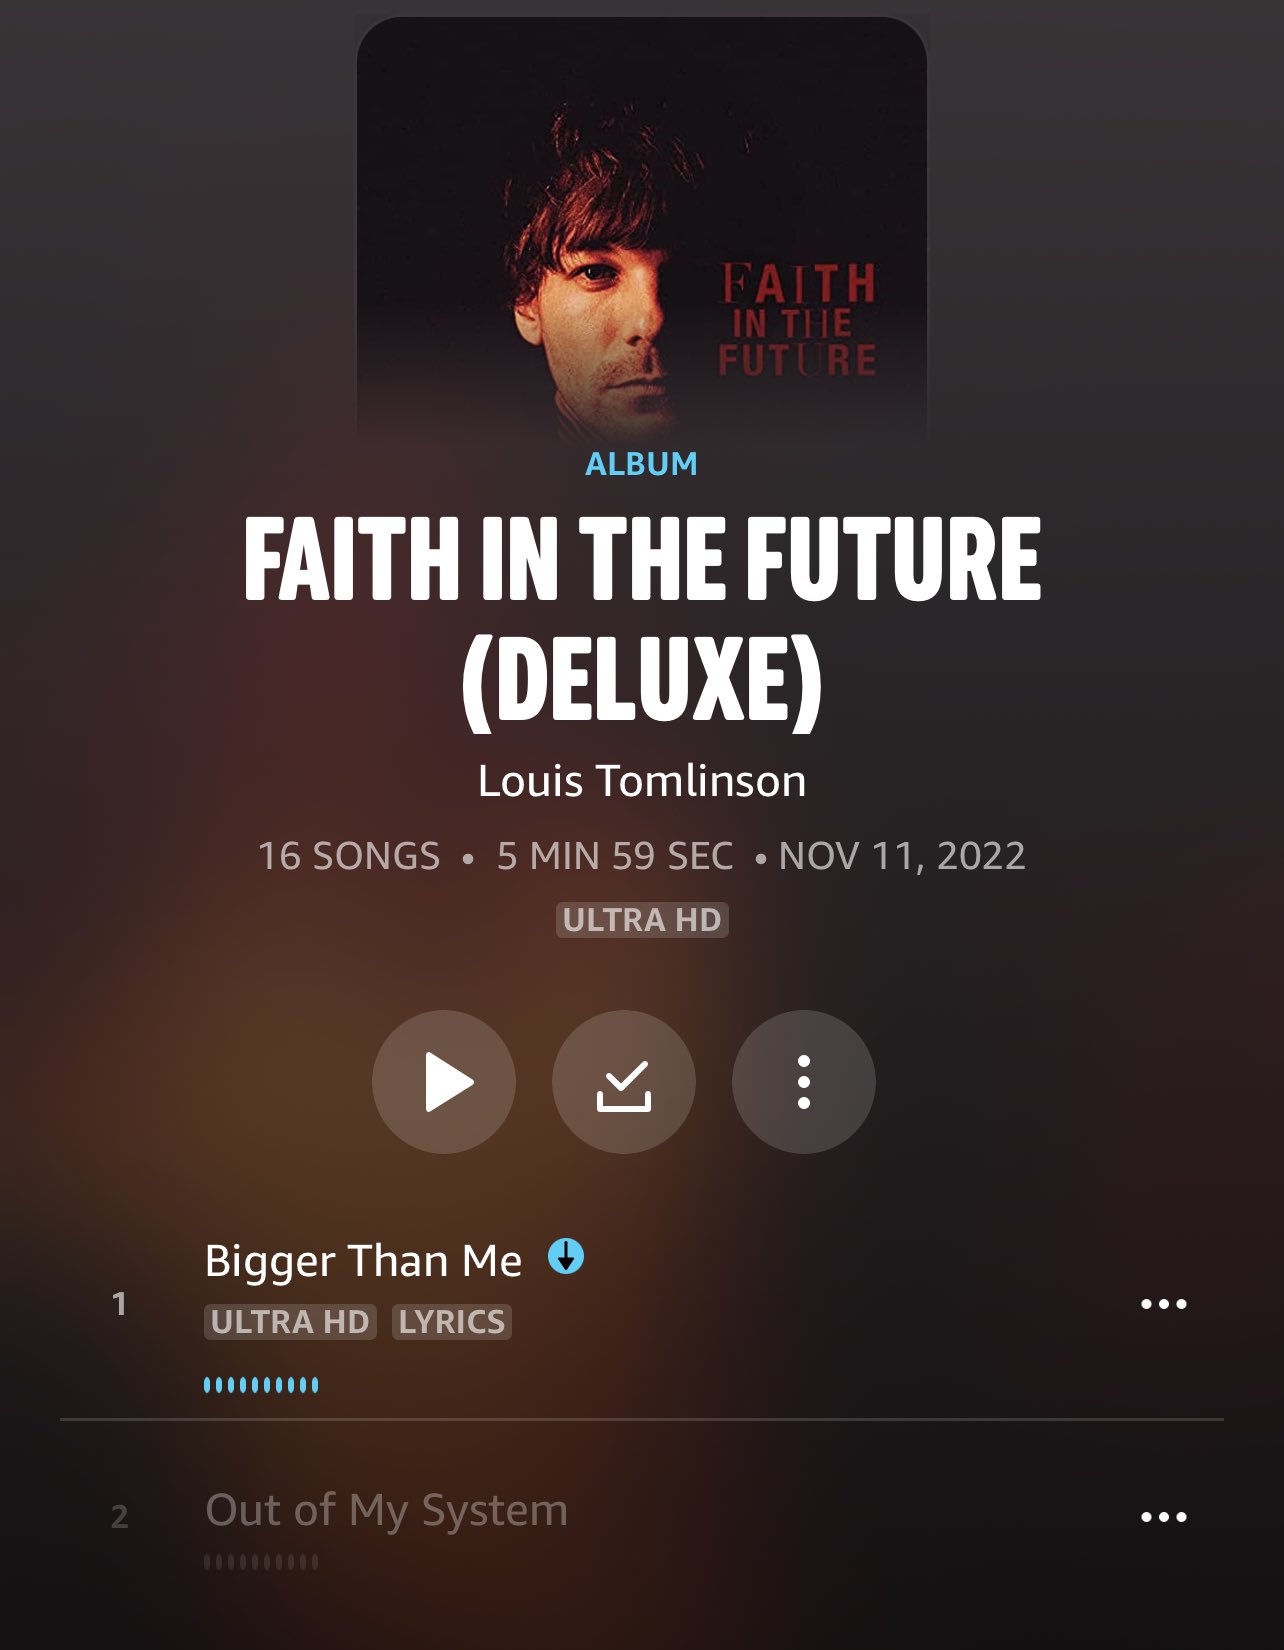 Louis Tomlinson - Faith in the Future (Deluxe) Lyrics and Tracklist